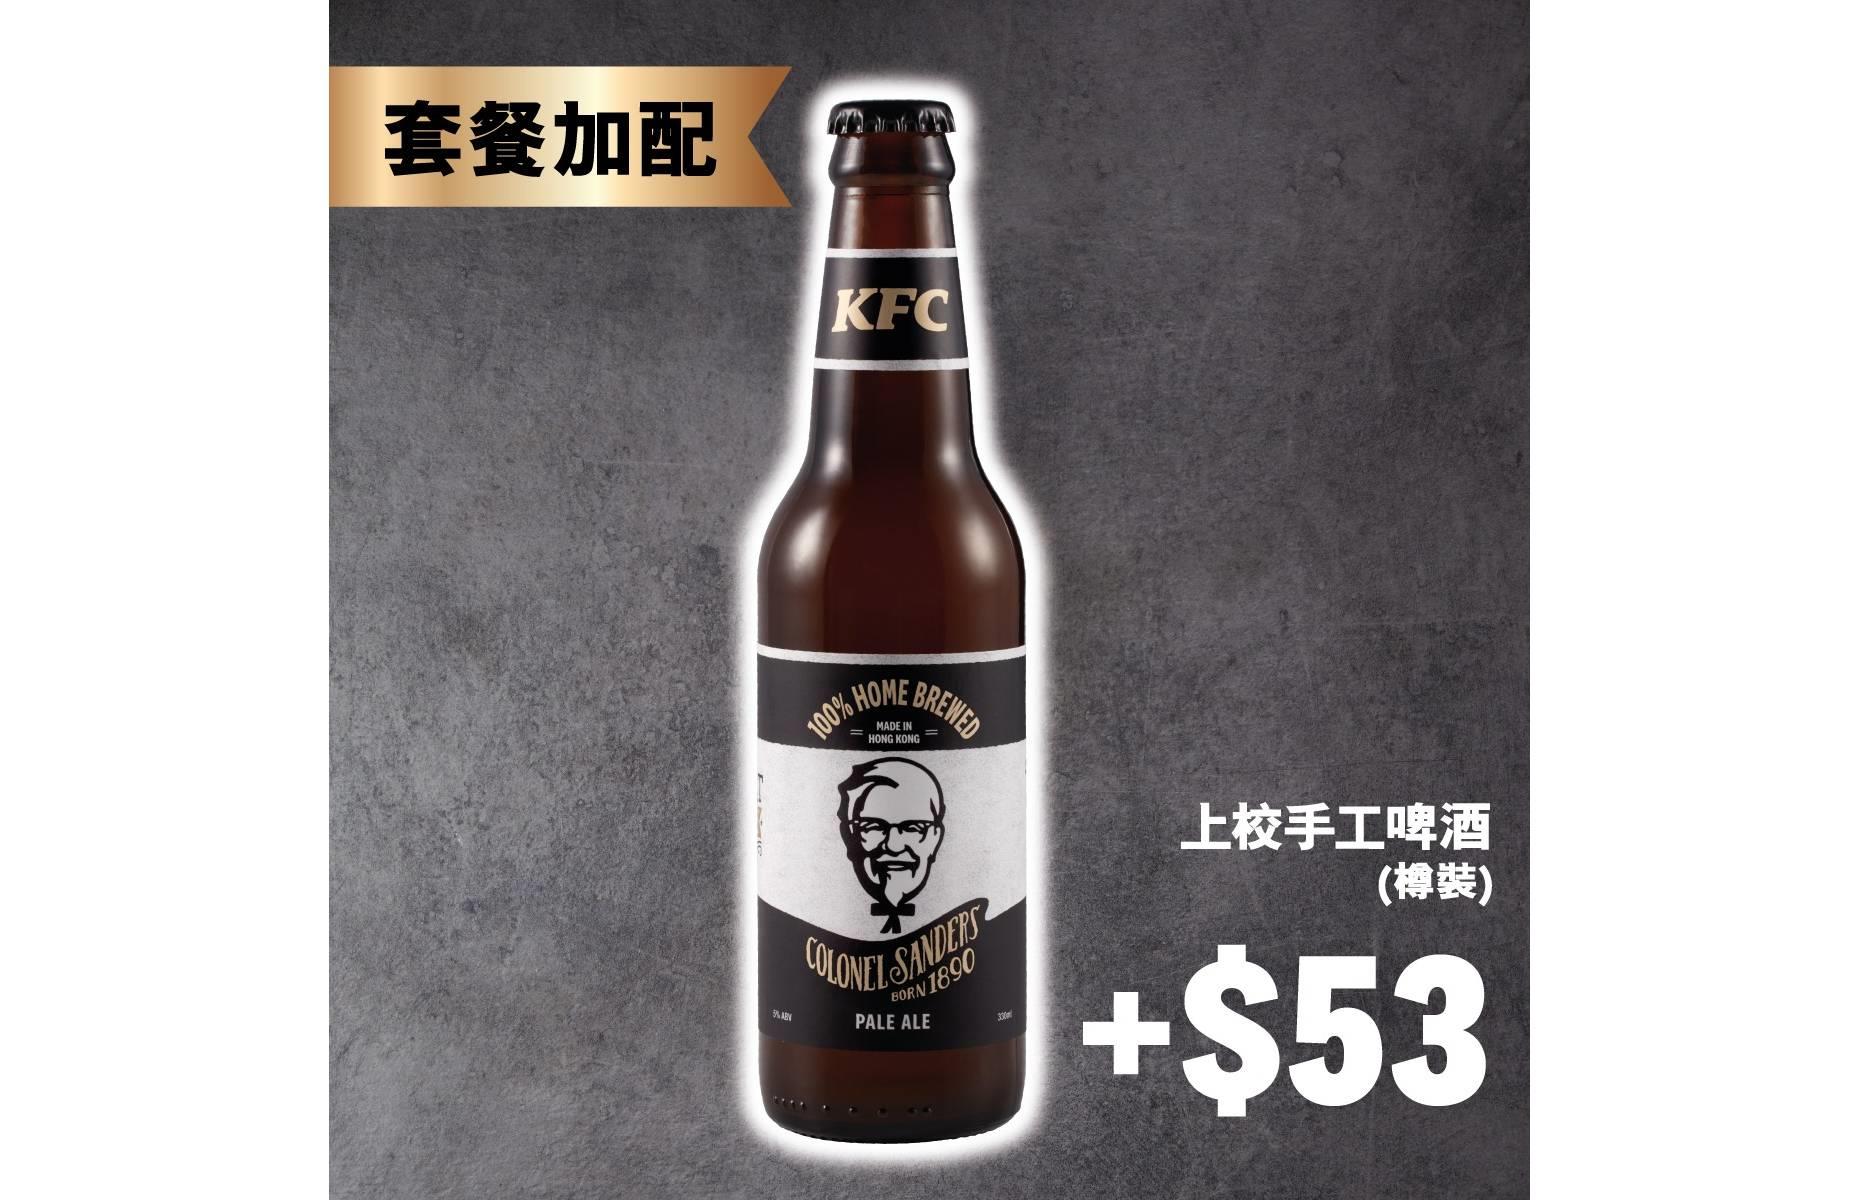 <p>Fried chicken and a refreshing beer is a match made in heaven and Hong Kong residents were able to enjoy a line of KFC-branded alcoholic drinks, Colonel Craft Beers, at concept stores in Causeway Bay in 2019. The bottled pale ale citra was hoppy with zesty grapefruit and lychee notes. In fact, many KFC markets serve beer, including Japan, Korea, Canada and some countries in Europe.</p>